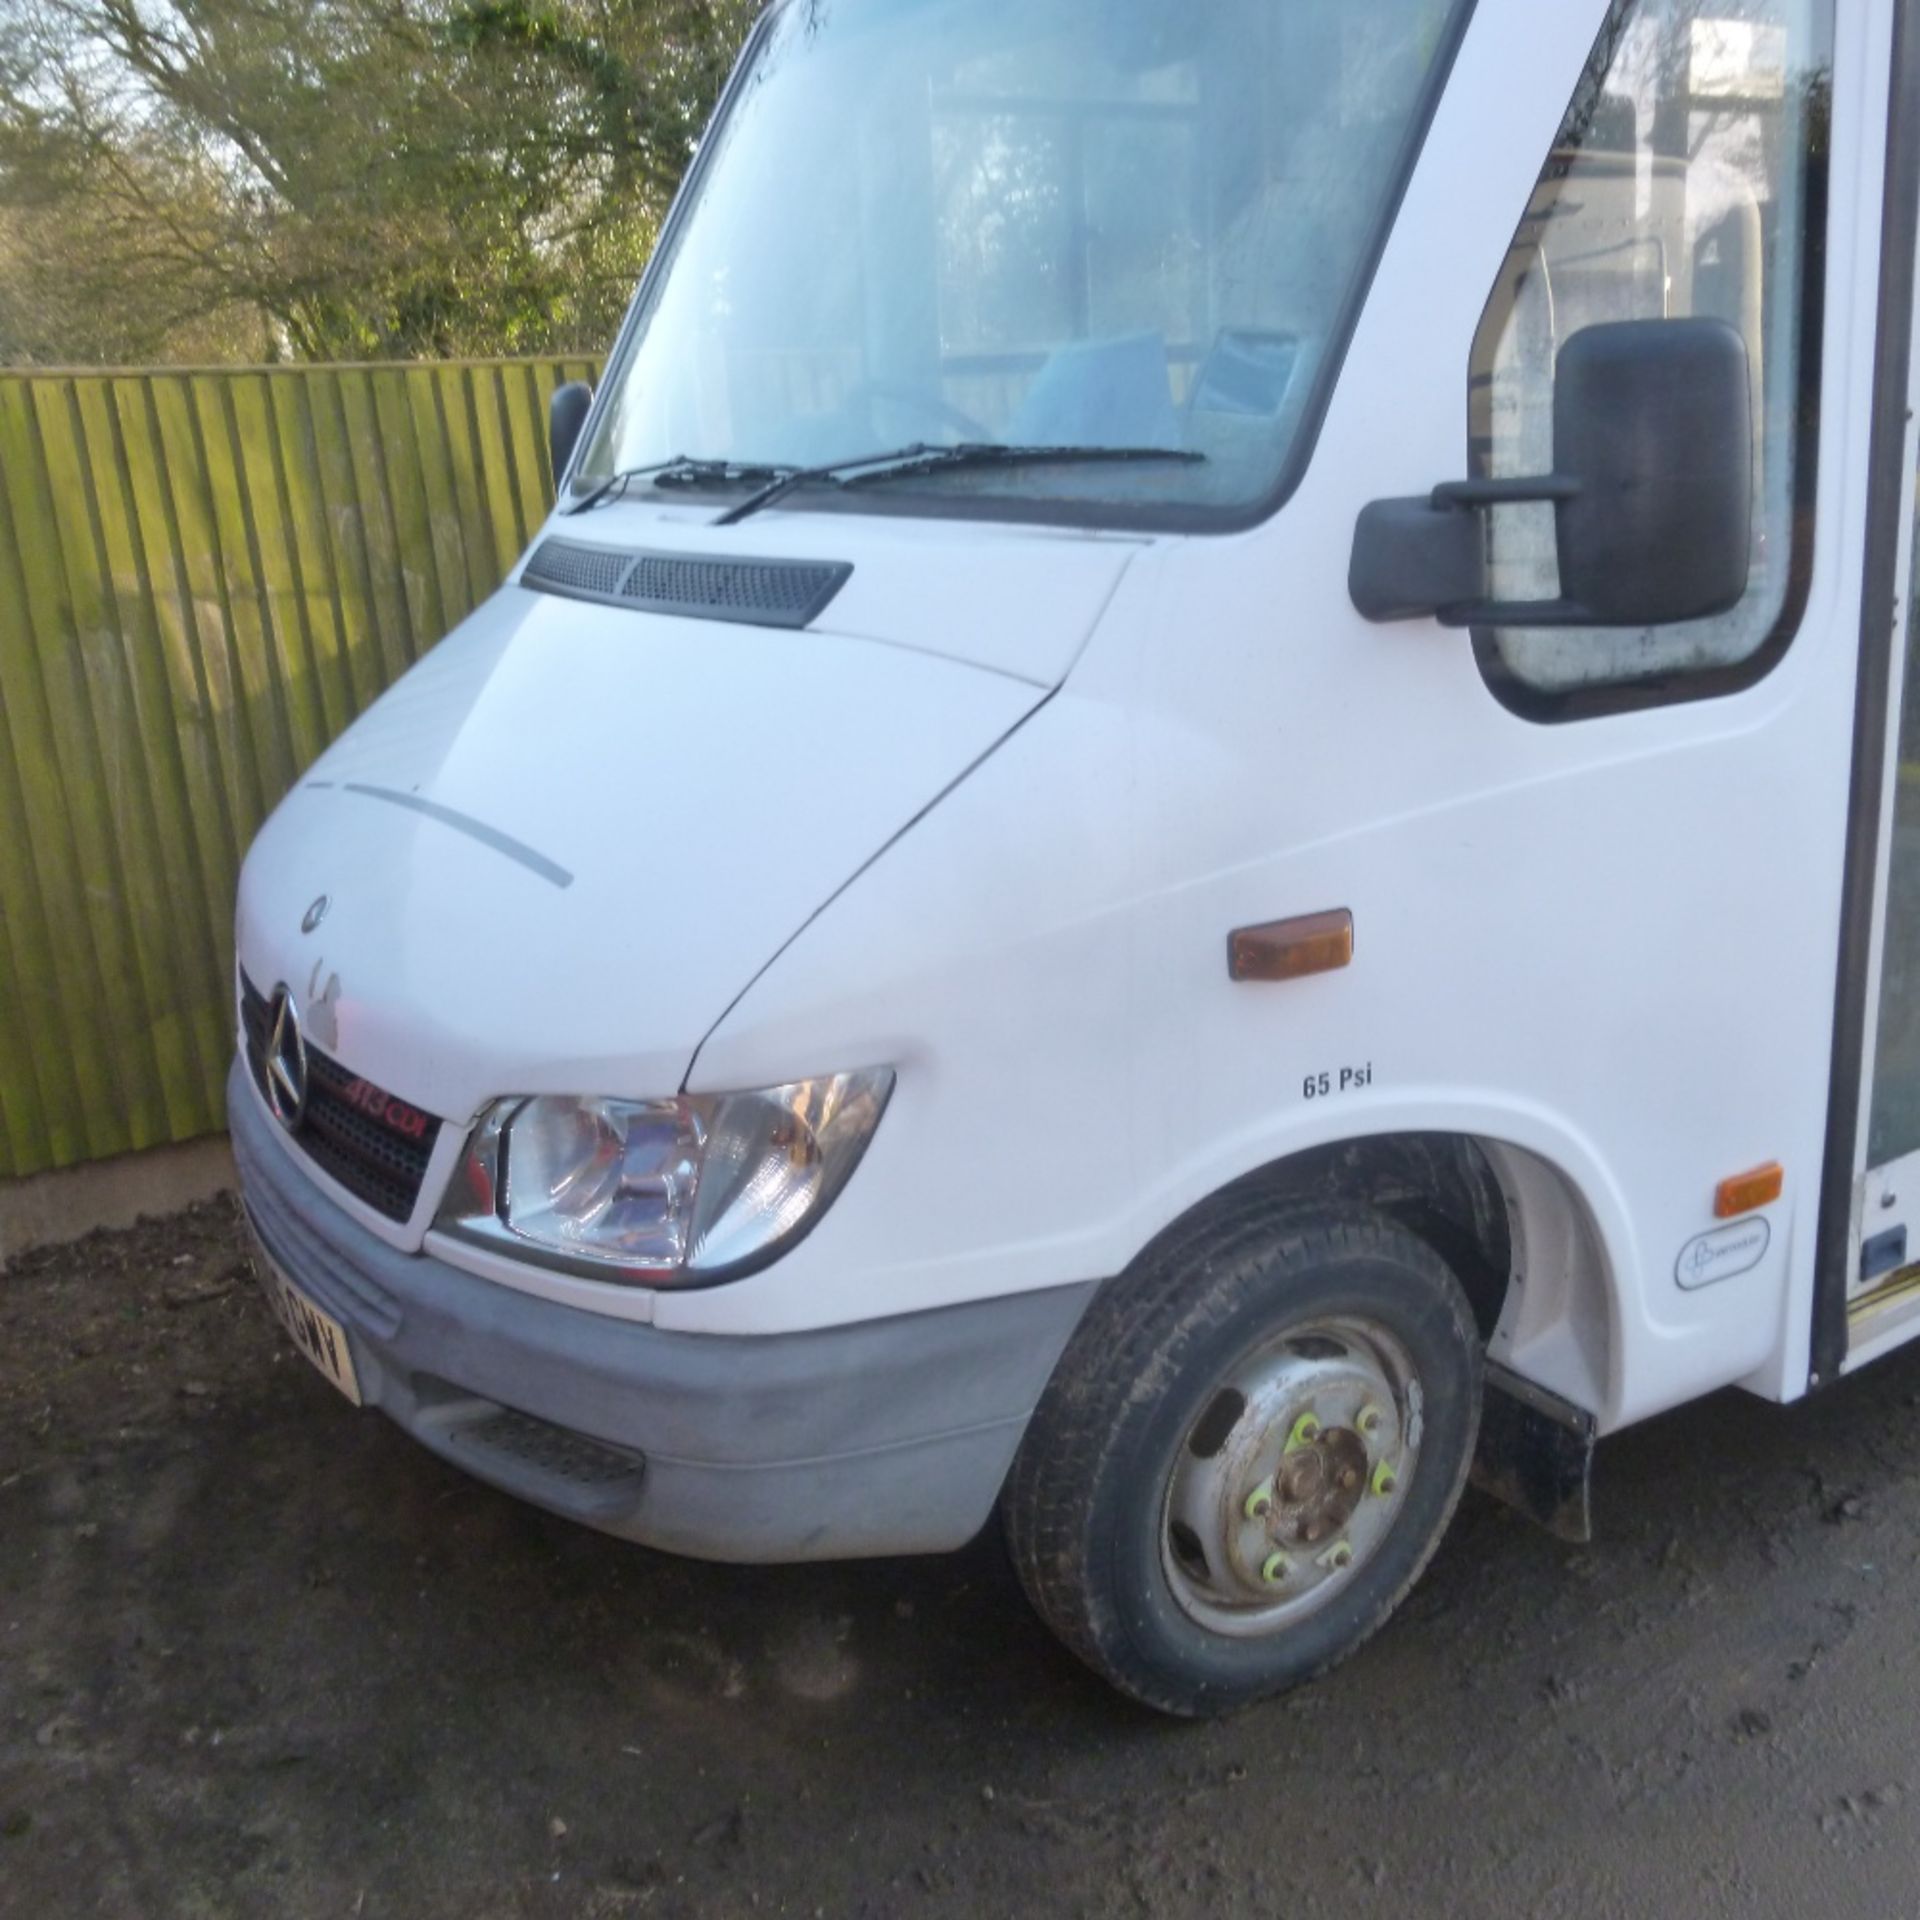 Mercedes 413CDI Sprinter Bus, electric doors, chair lift to rear, MOT until September 2022, - Image 5 of 5